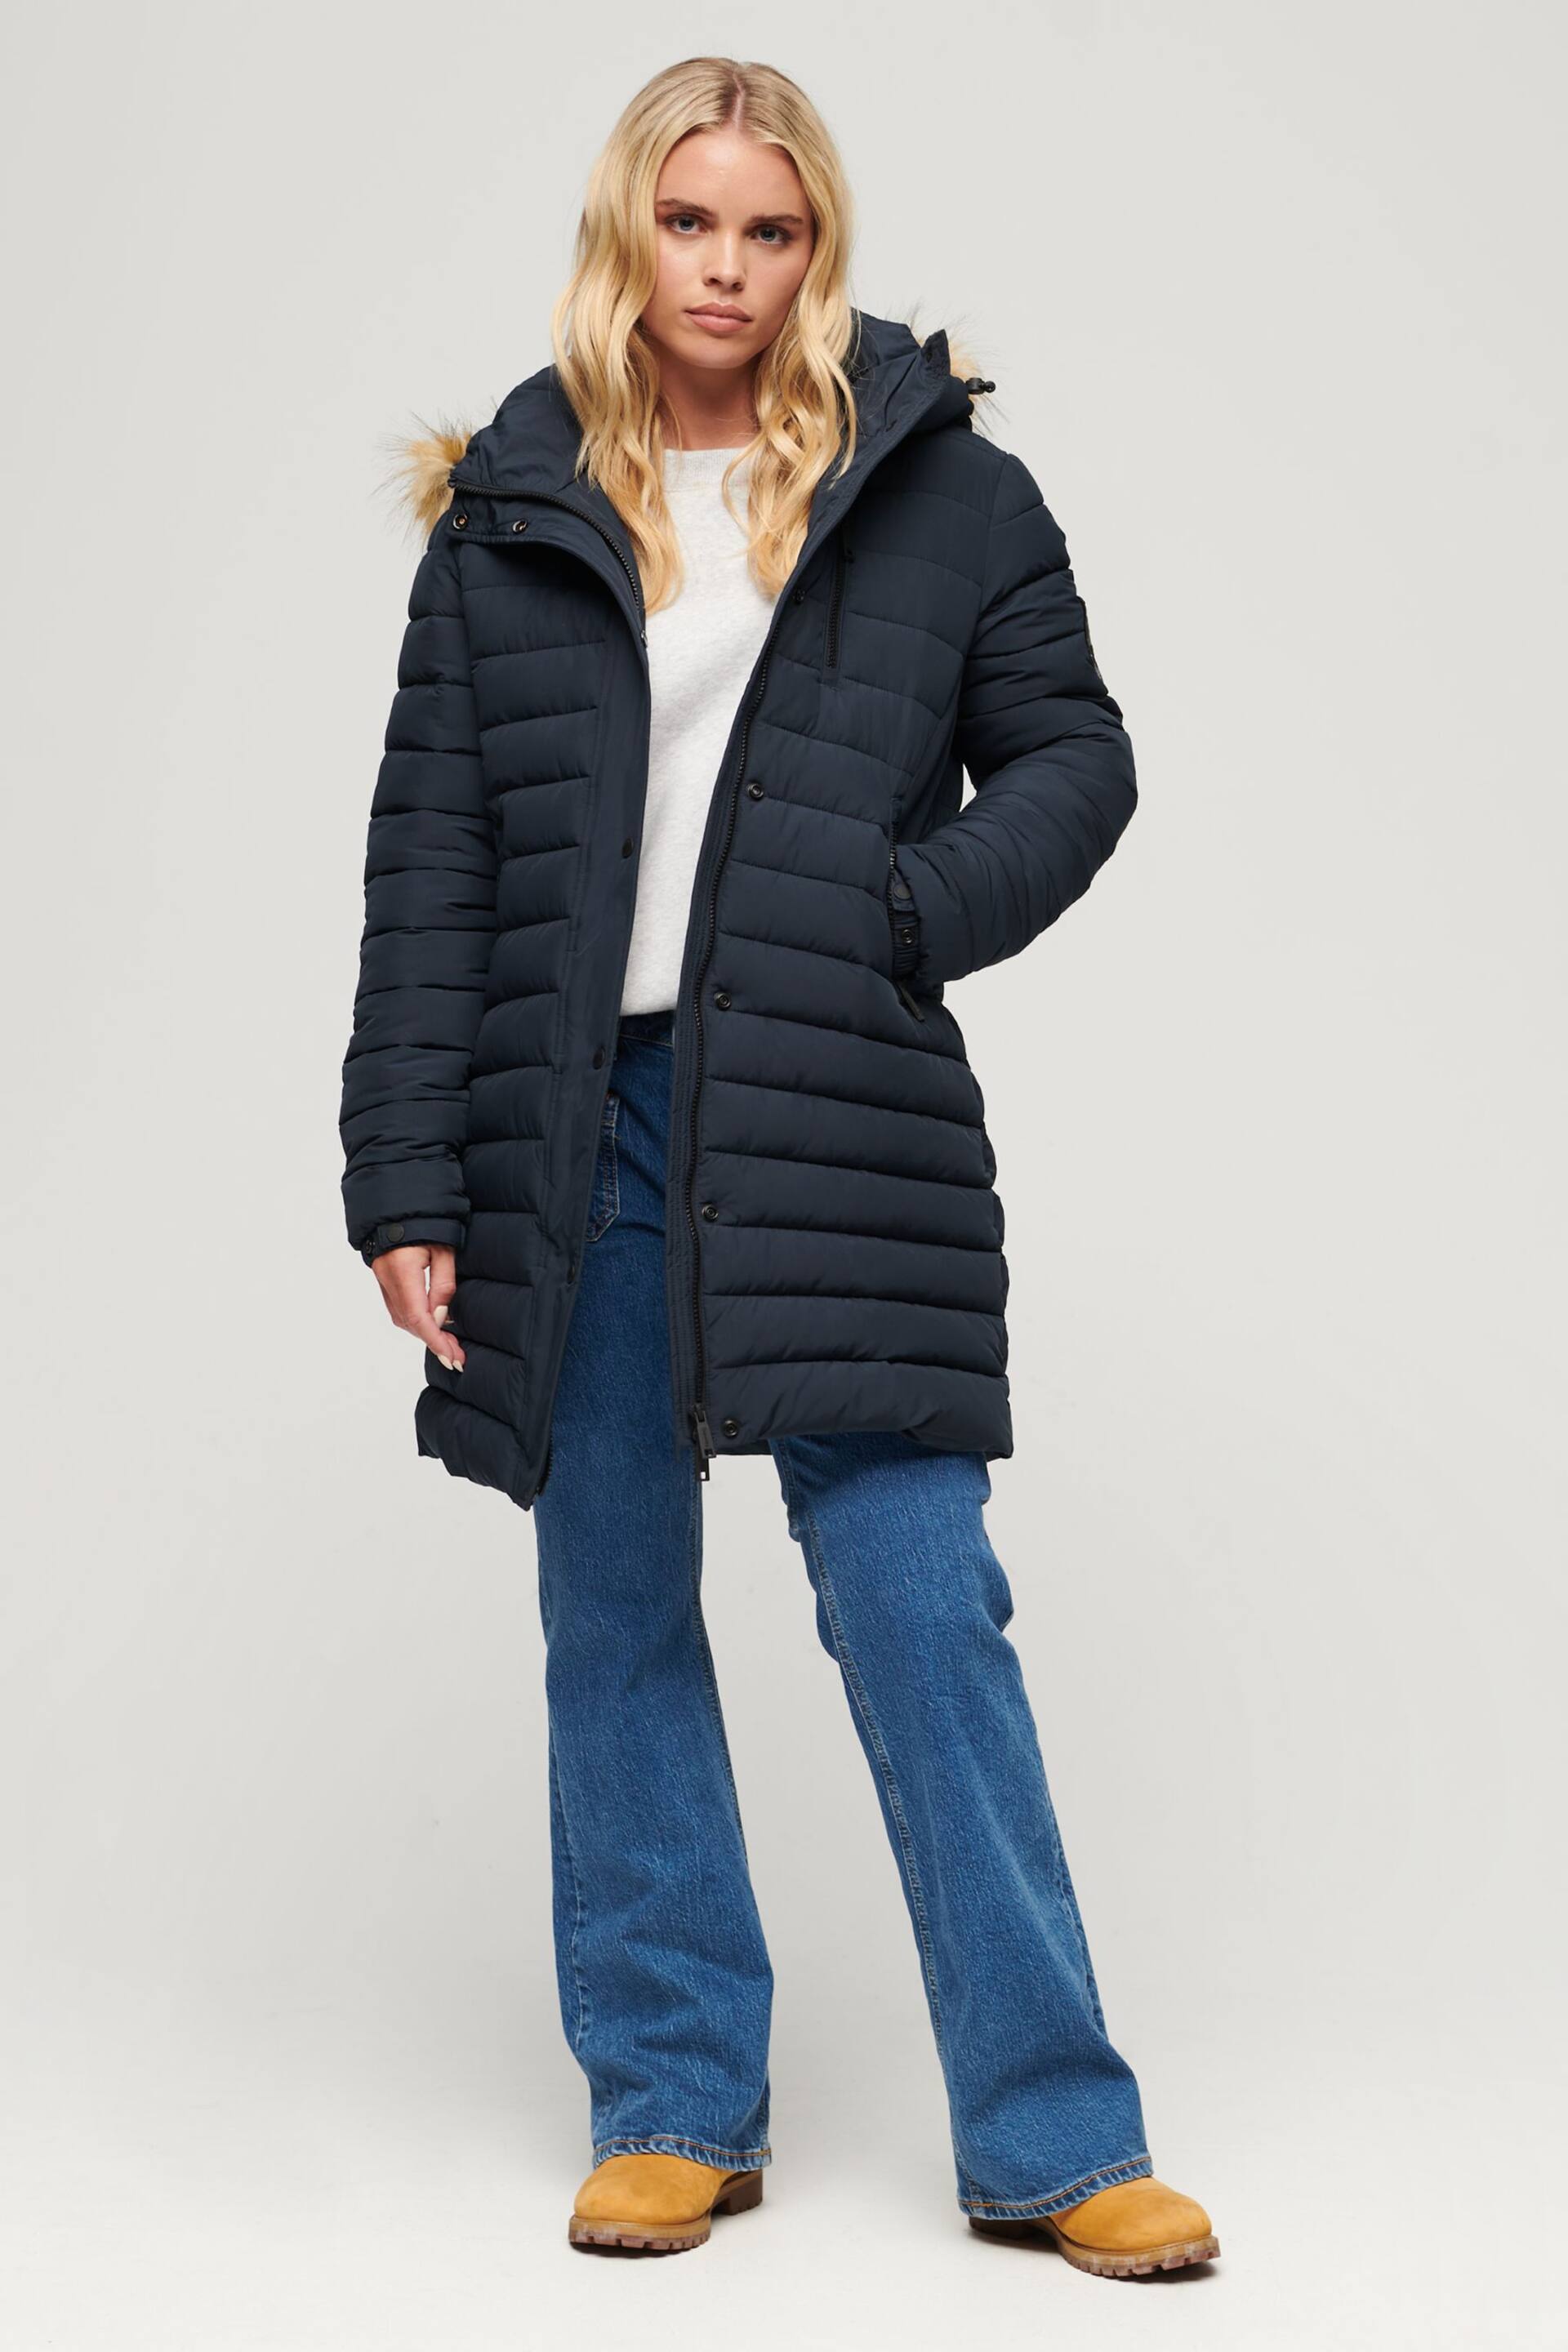 Superdry Blue Fuji Hooded Mid Length Puffer Jacket - Image 3 of 7